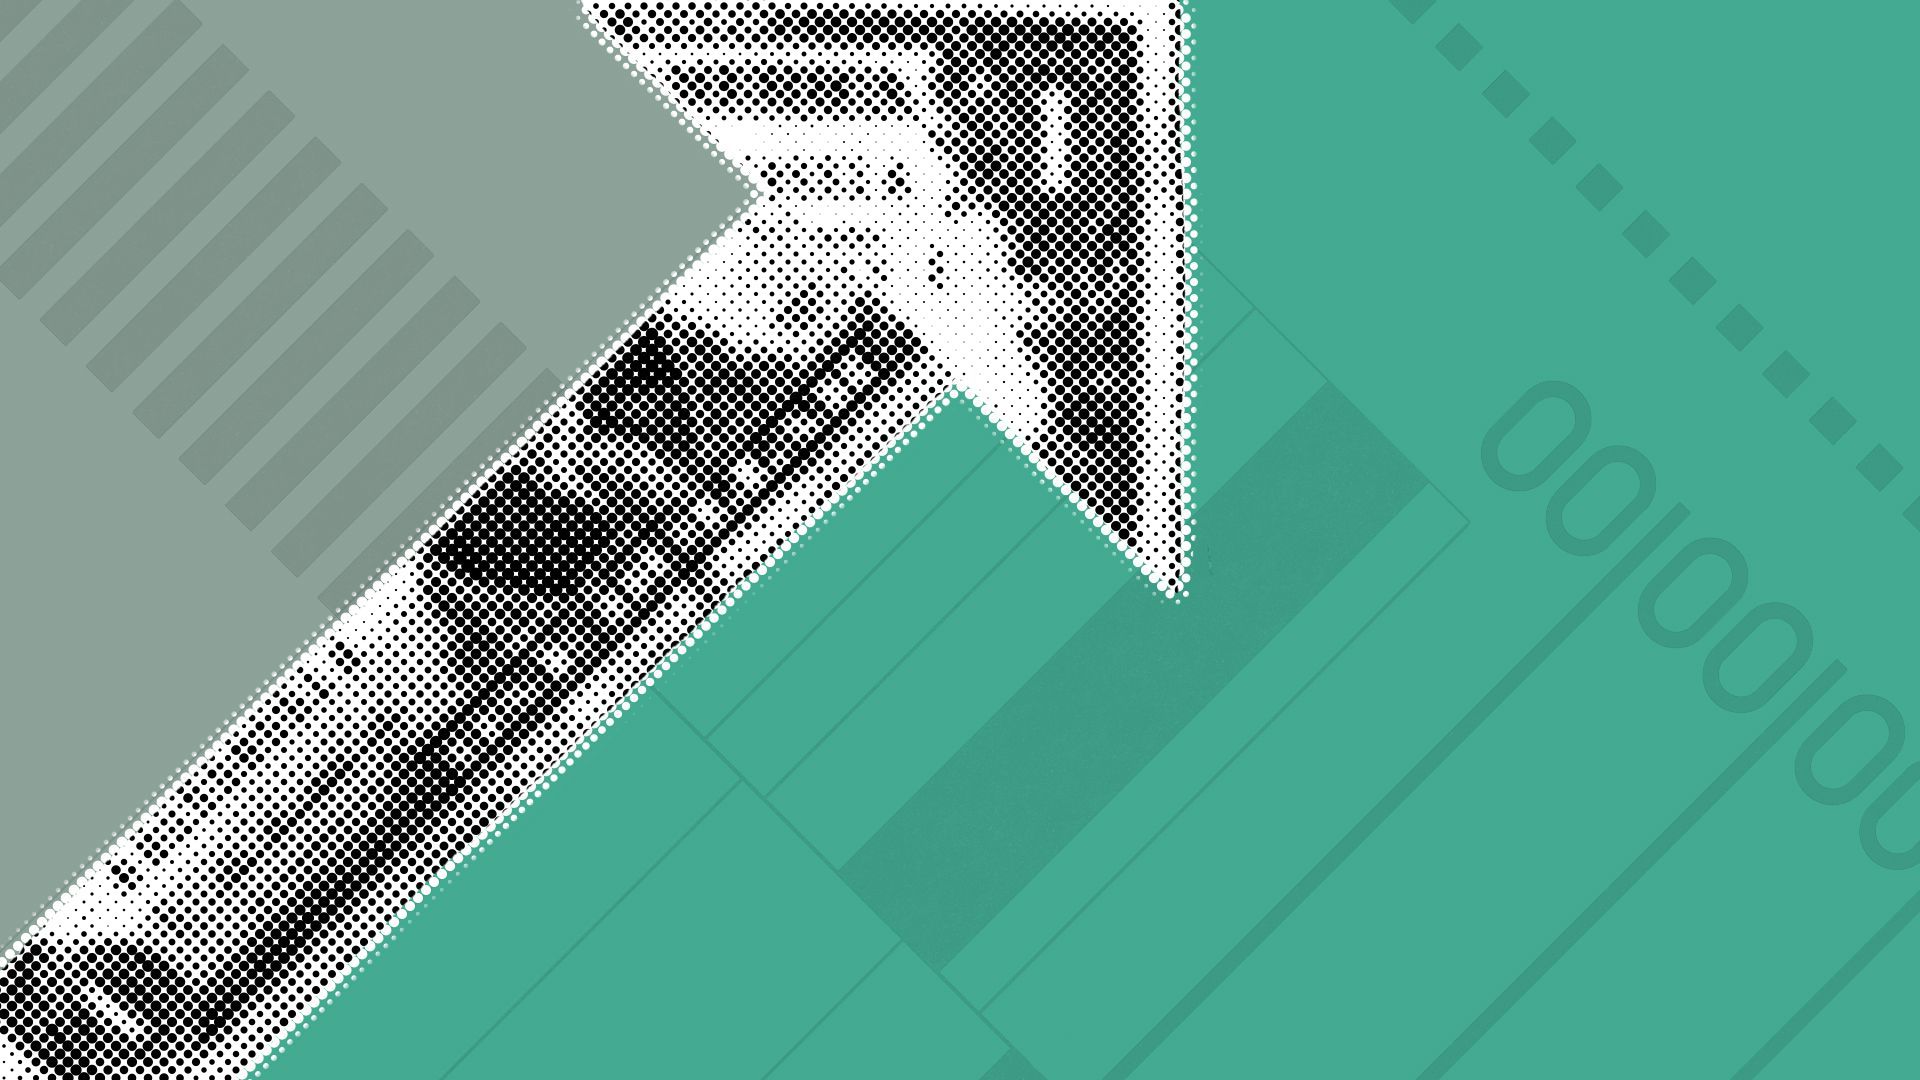 Illustration of a dollar folded into an arrow, separating color blocks of green and gray, with elements of ballots behind it. 